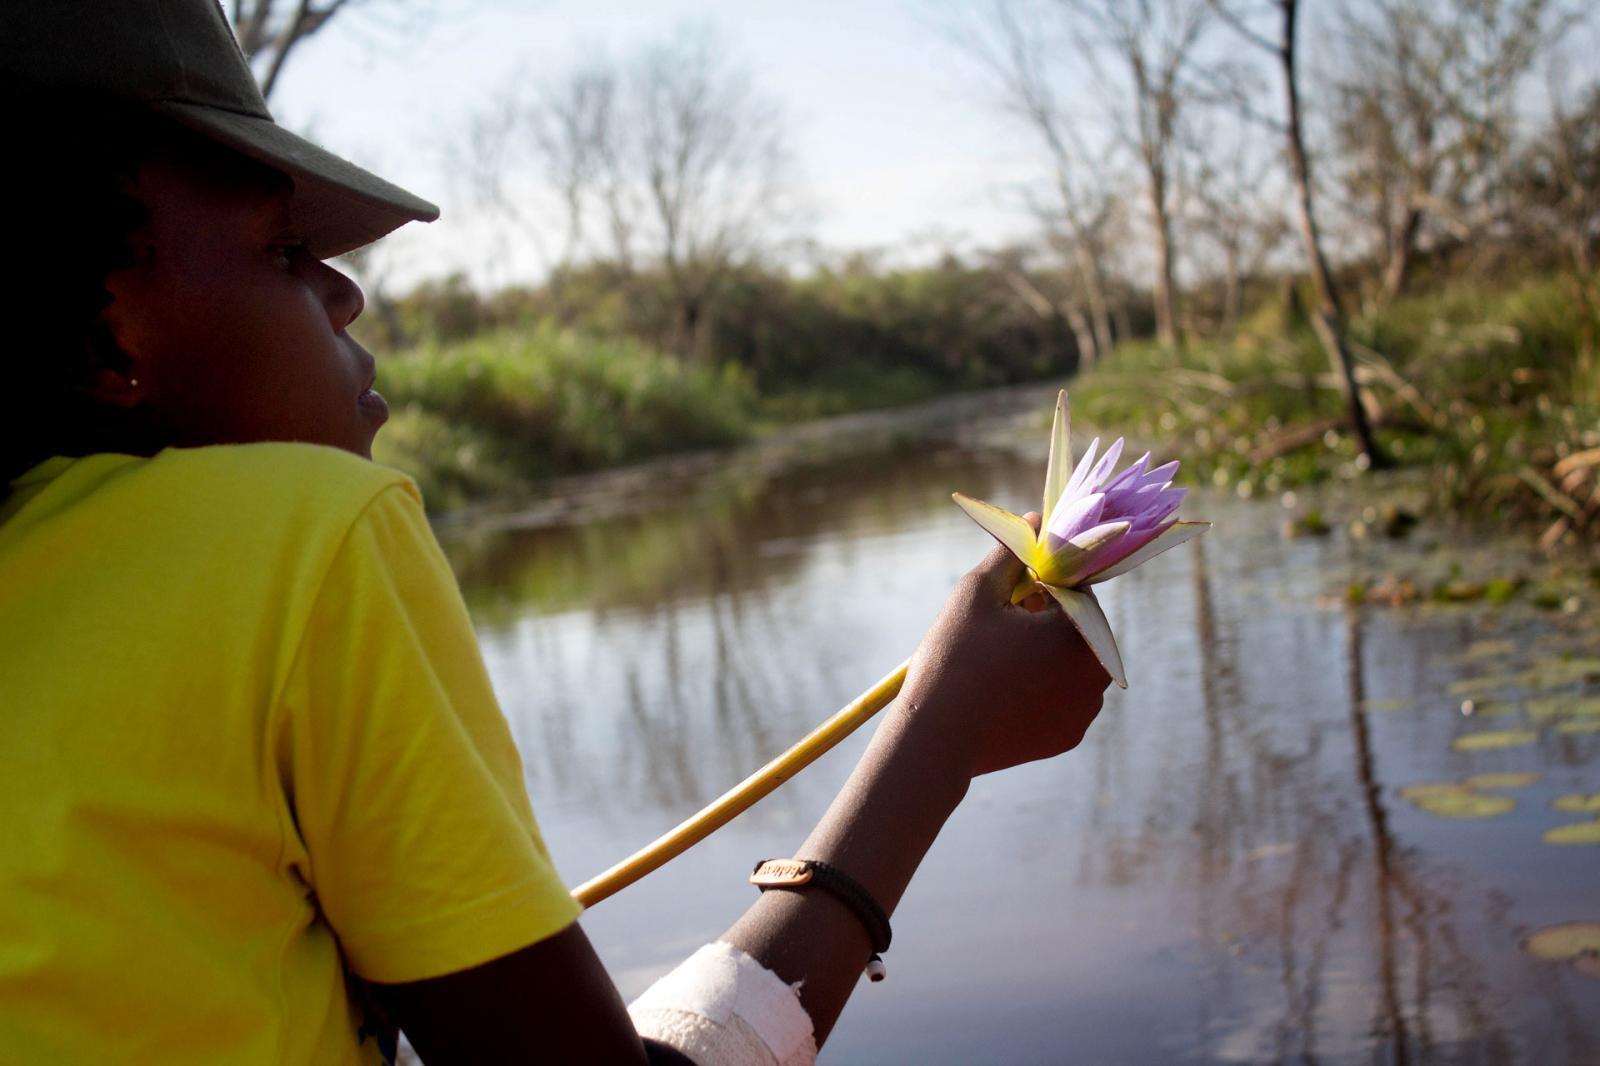 Edith, a snake handler working with Uganda Reptile Village, looks out across a wetland while holding a water lily.